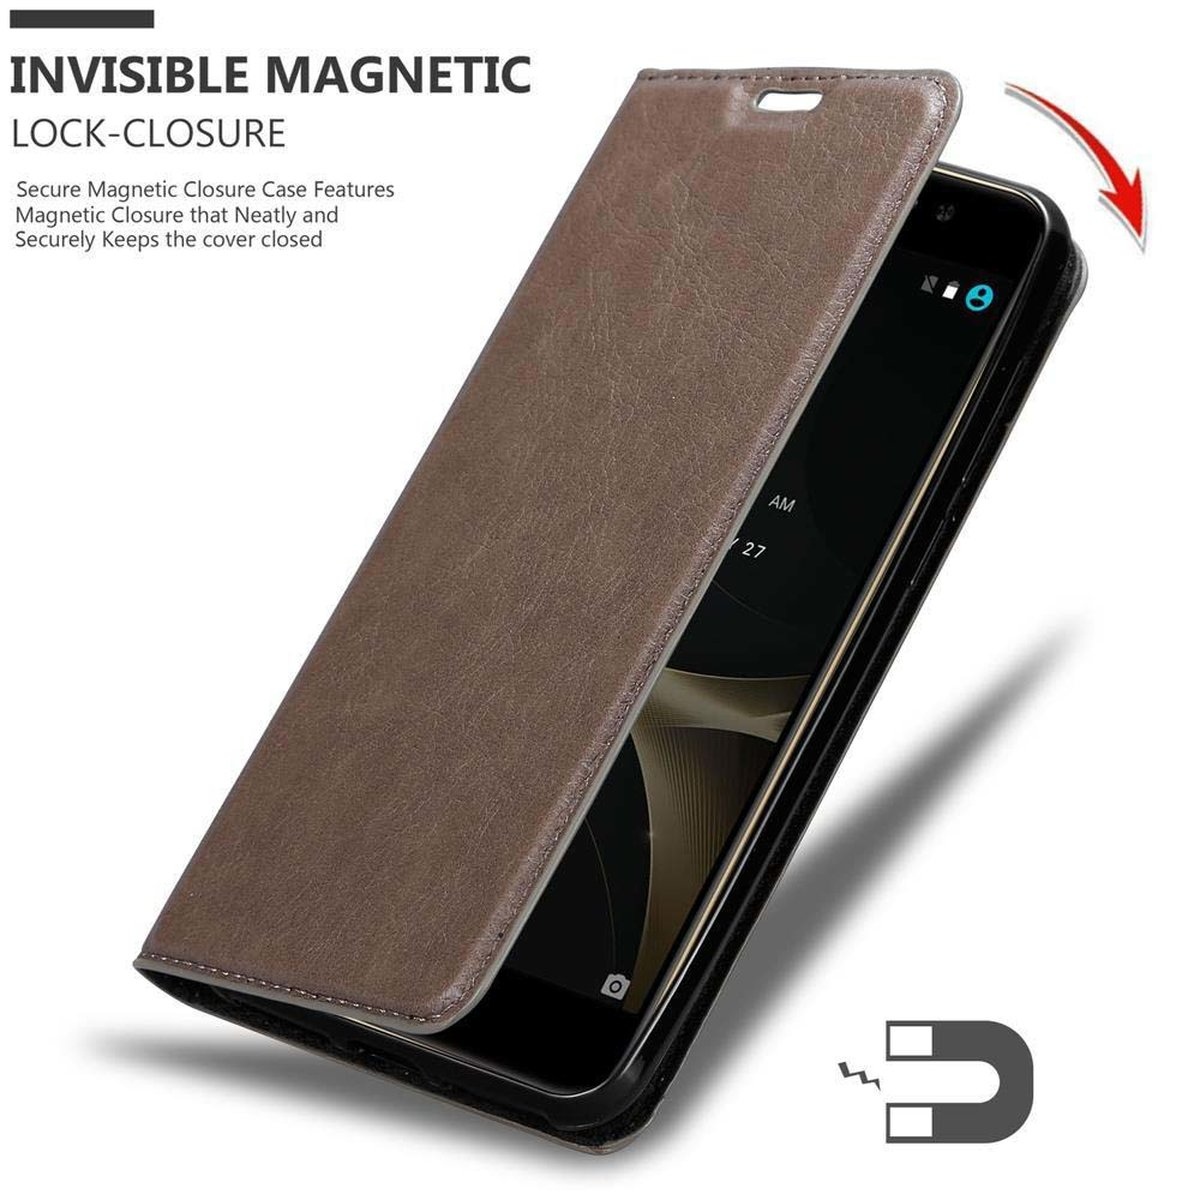 ZTE, Magnet, Book Hülle N1 Nubia KAFFEE LITE, BRAUN Bookcover, Invisible CADORABO